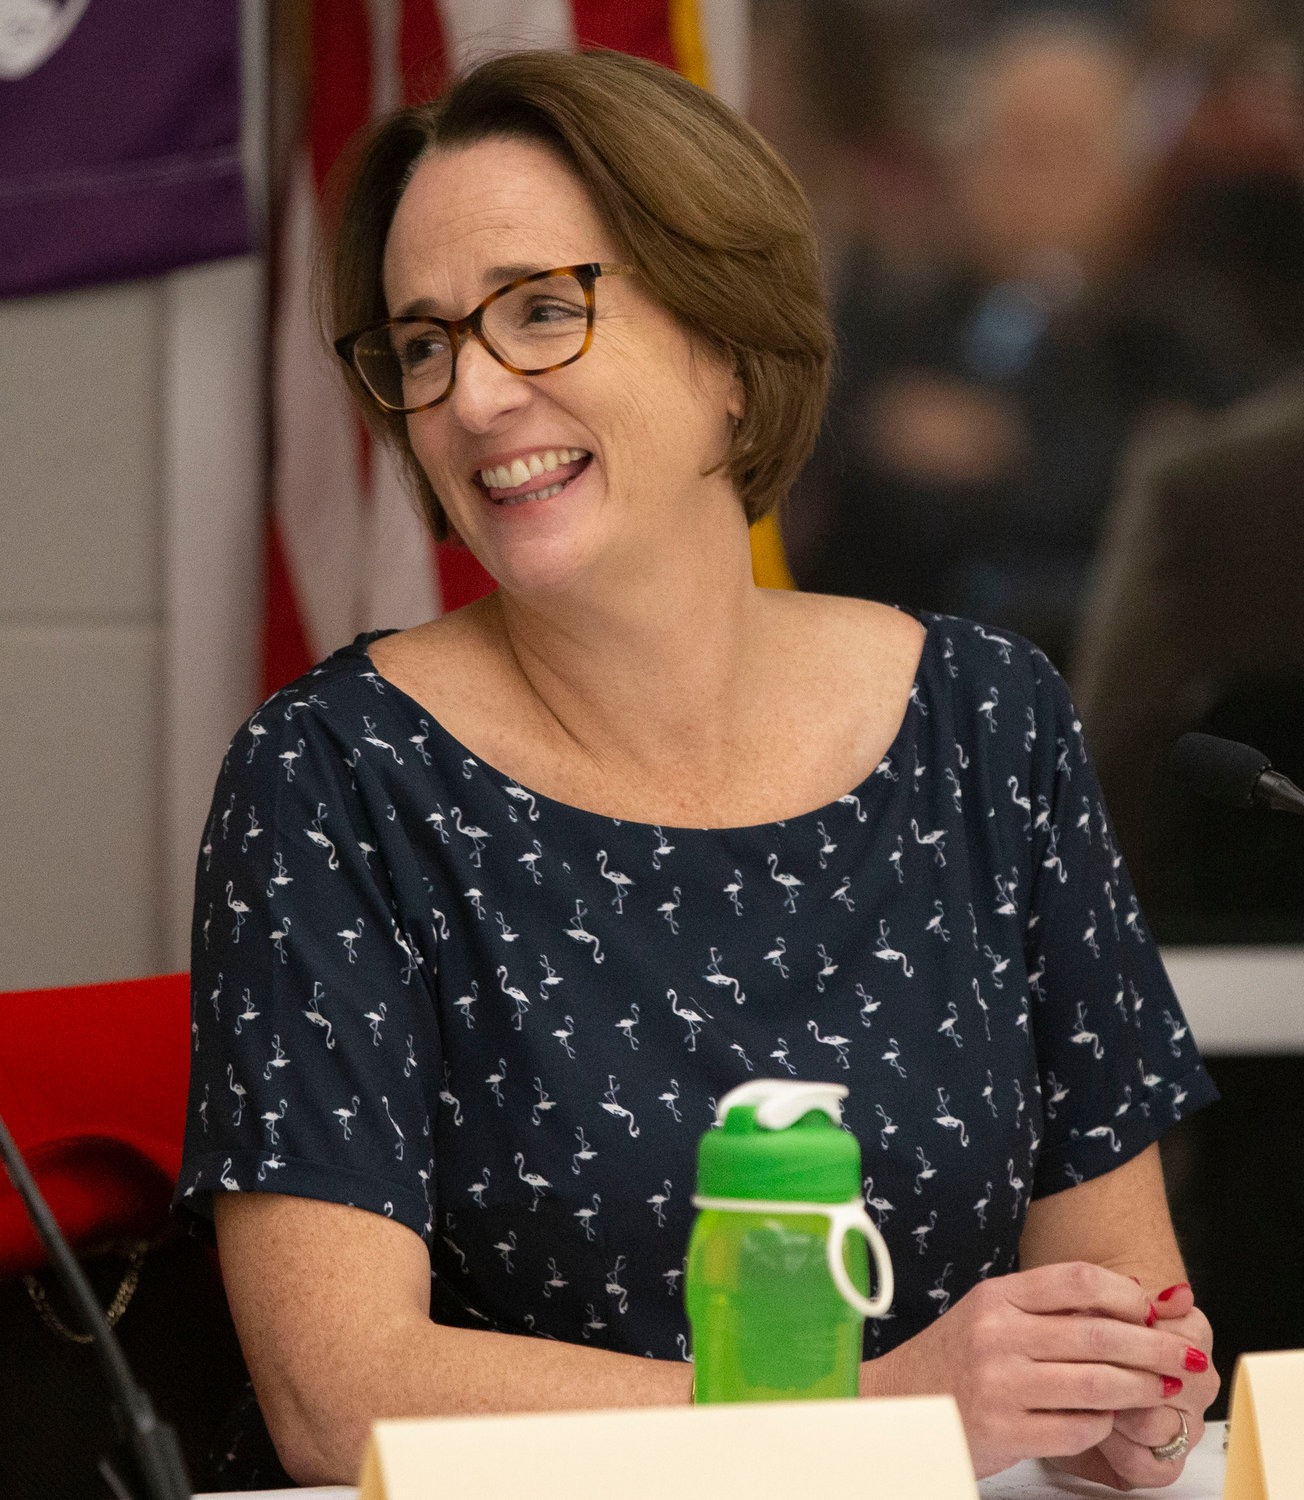 Nicky Piper, who was first elected to the school committee in 2020, was voted the next chairperson of the Bristol Warren School Committee by a 7-2 vote on Monday night.